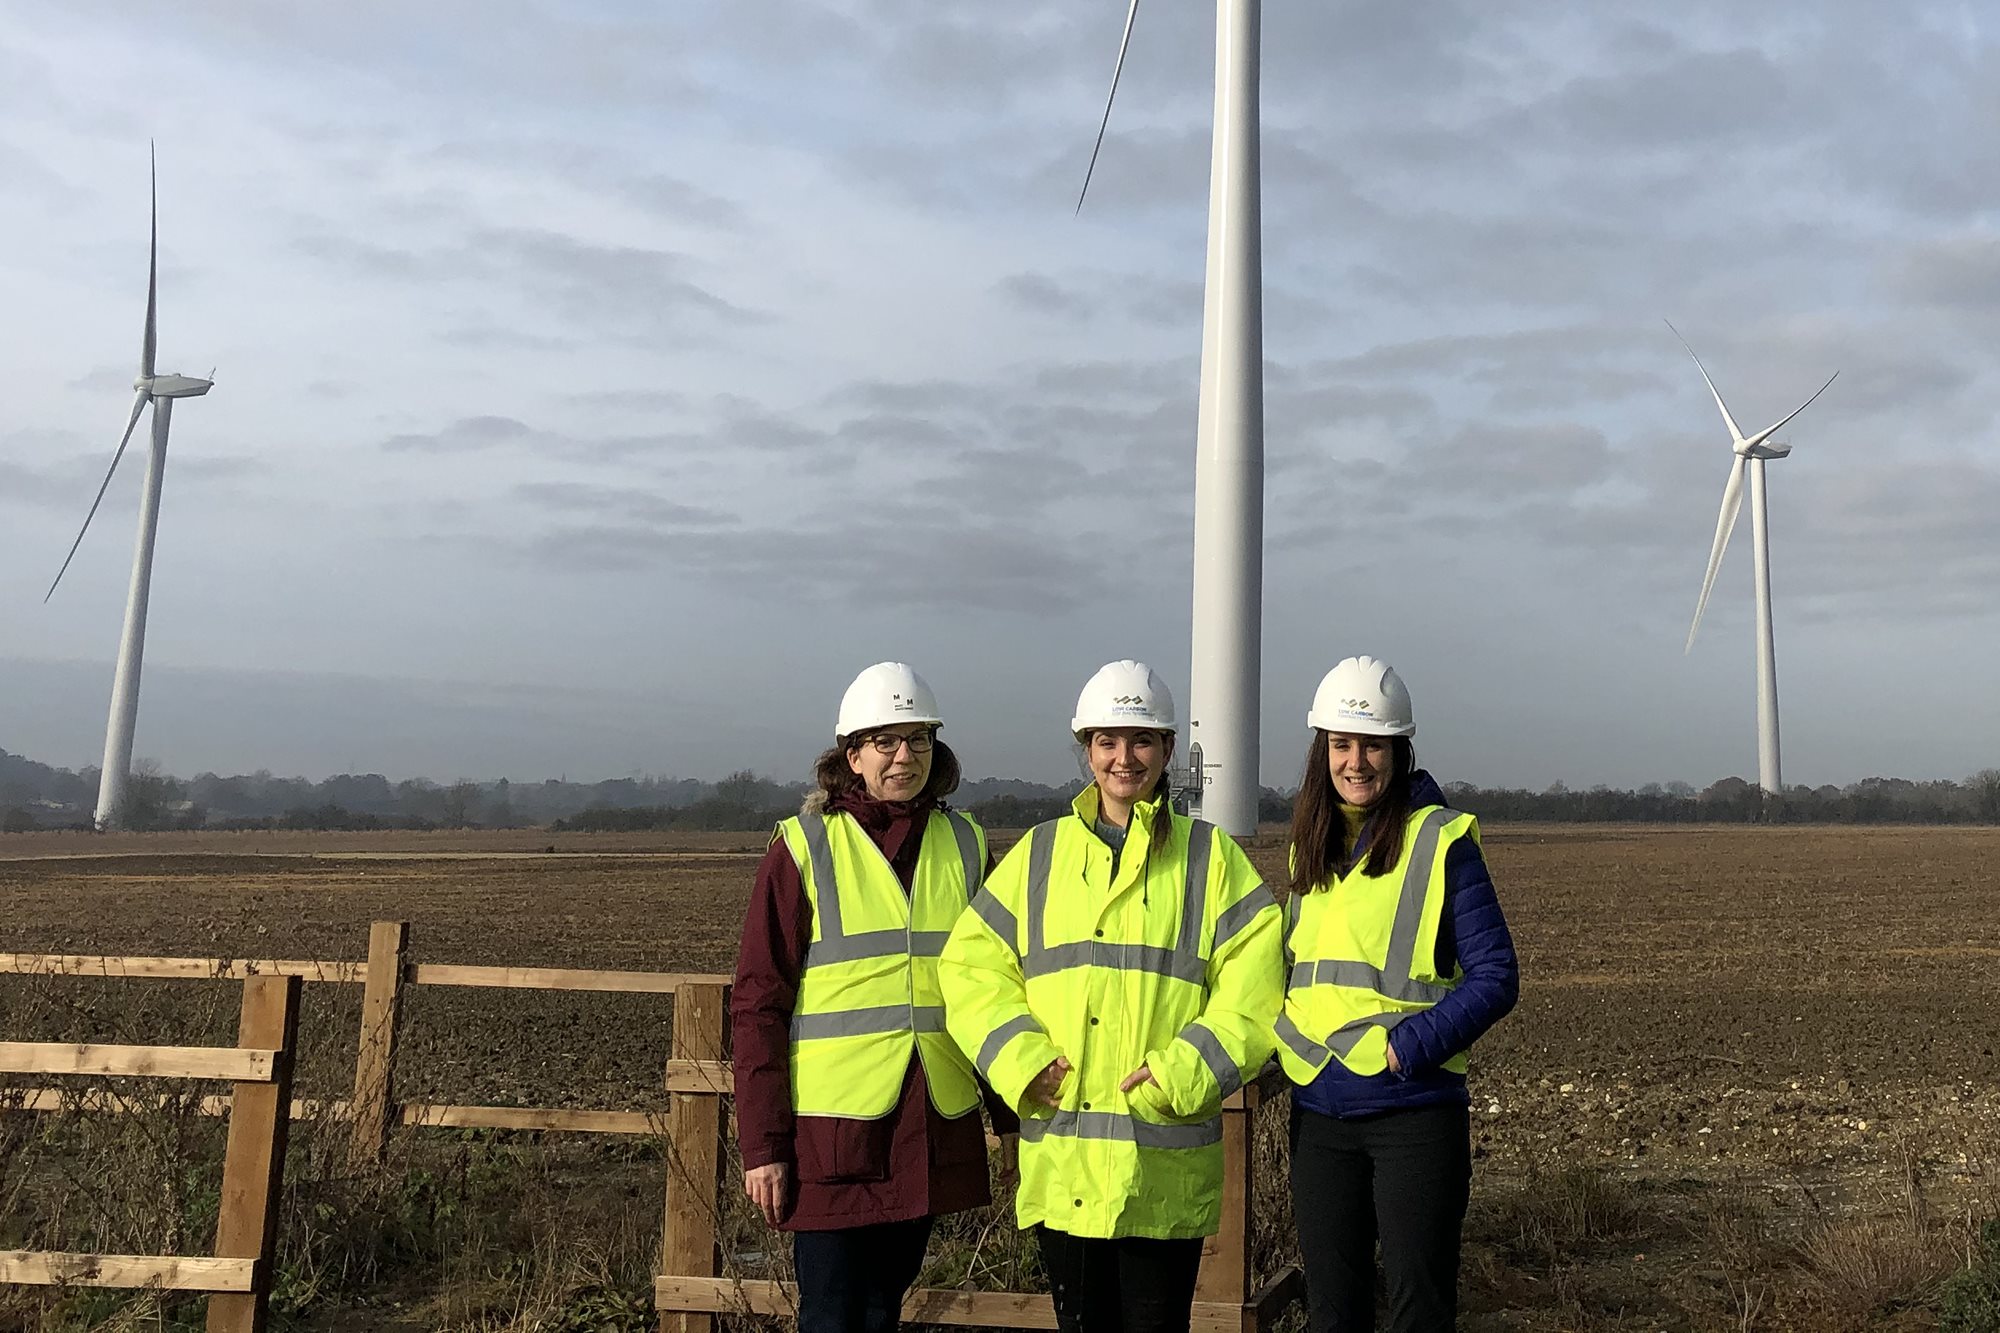 Mott MacDonald staff  stood in front of wind turbine at the Common Barn site as part of the Contract for Difference scheme, UK.